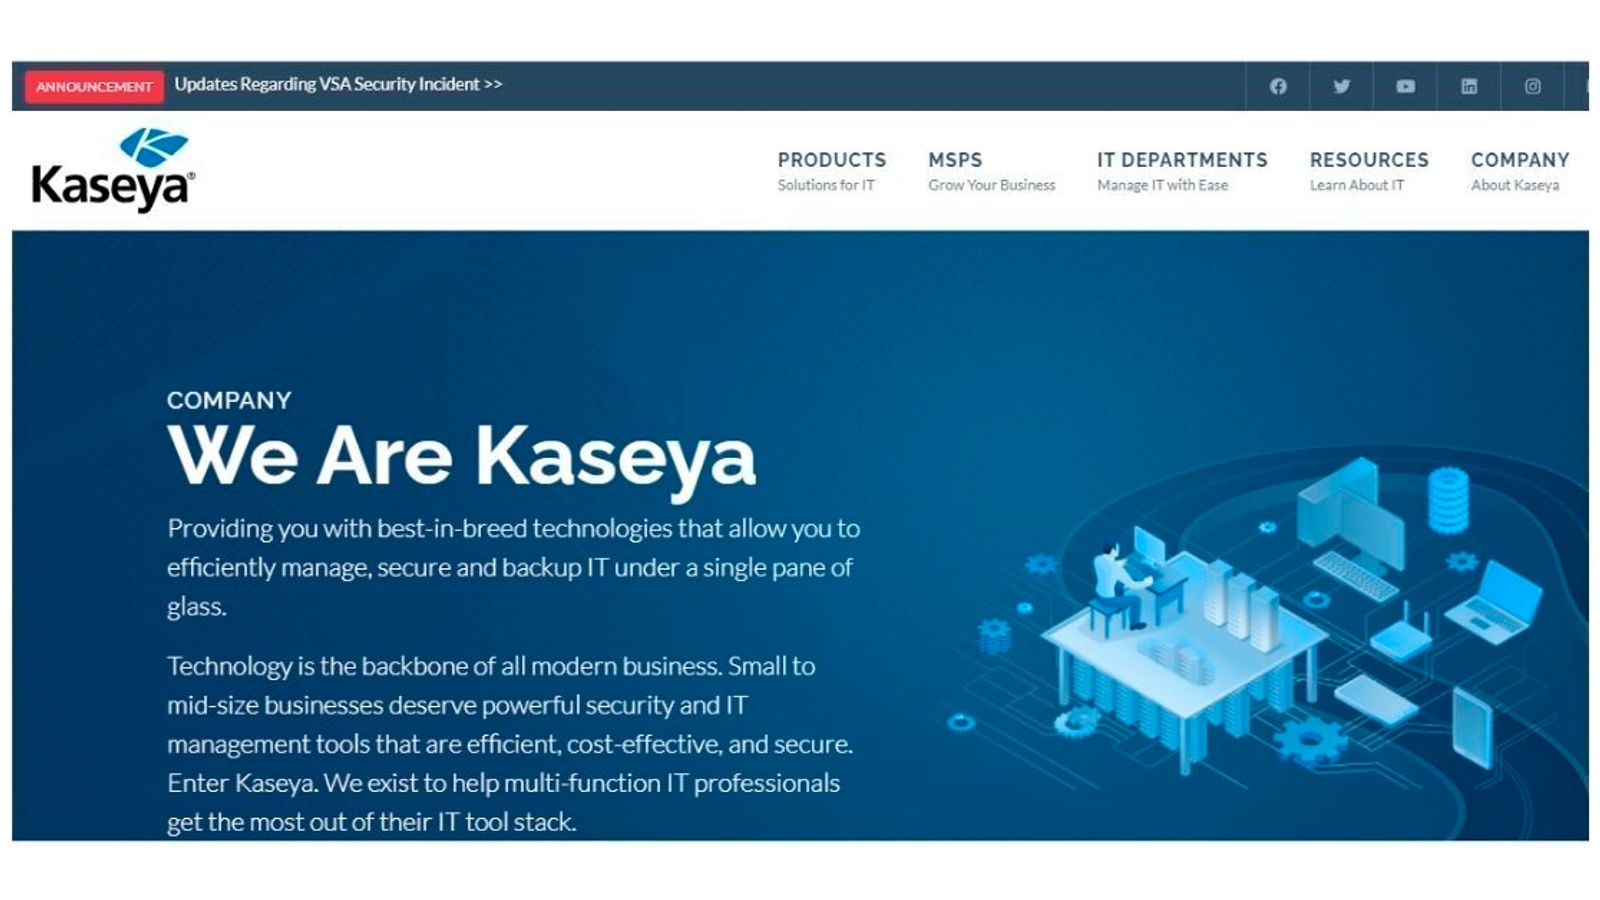 Kaseya says it has acquired ransomware decryption key ‘from trusted third party’